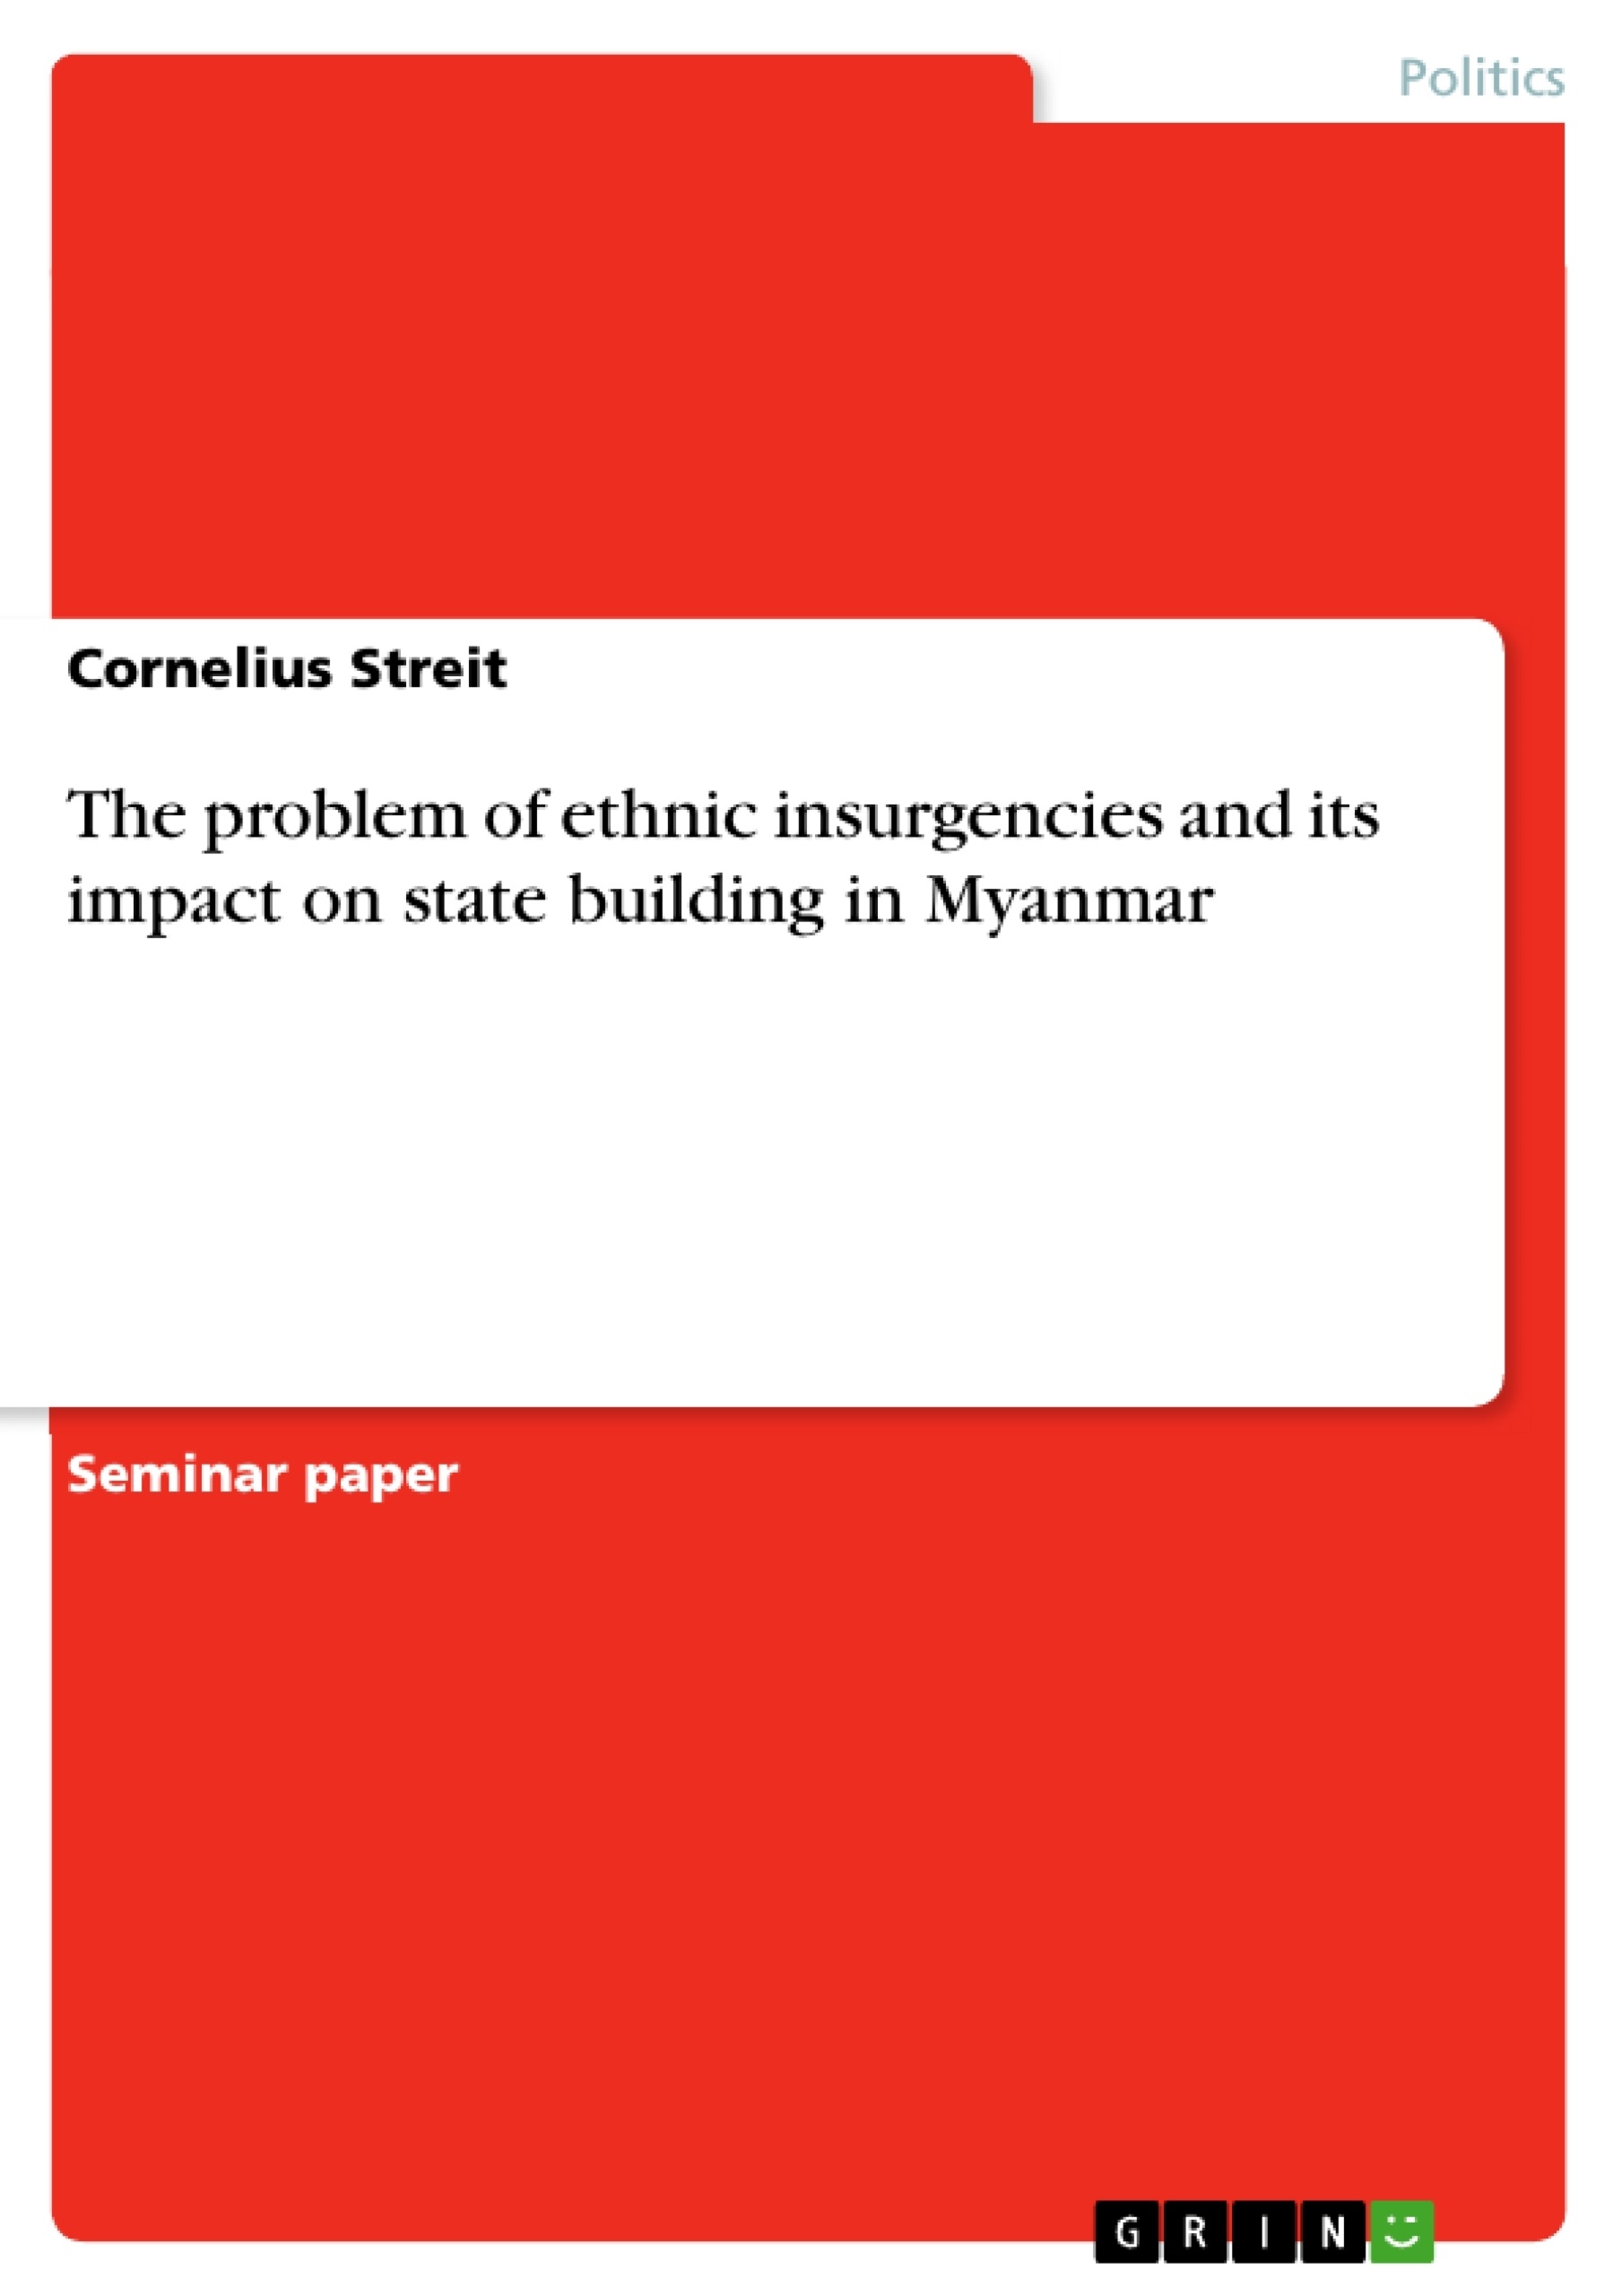 Title: The problem of ethnic insurgencies and its impact on state building in Myanmar